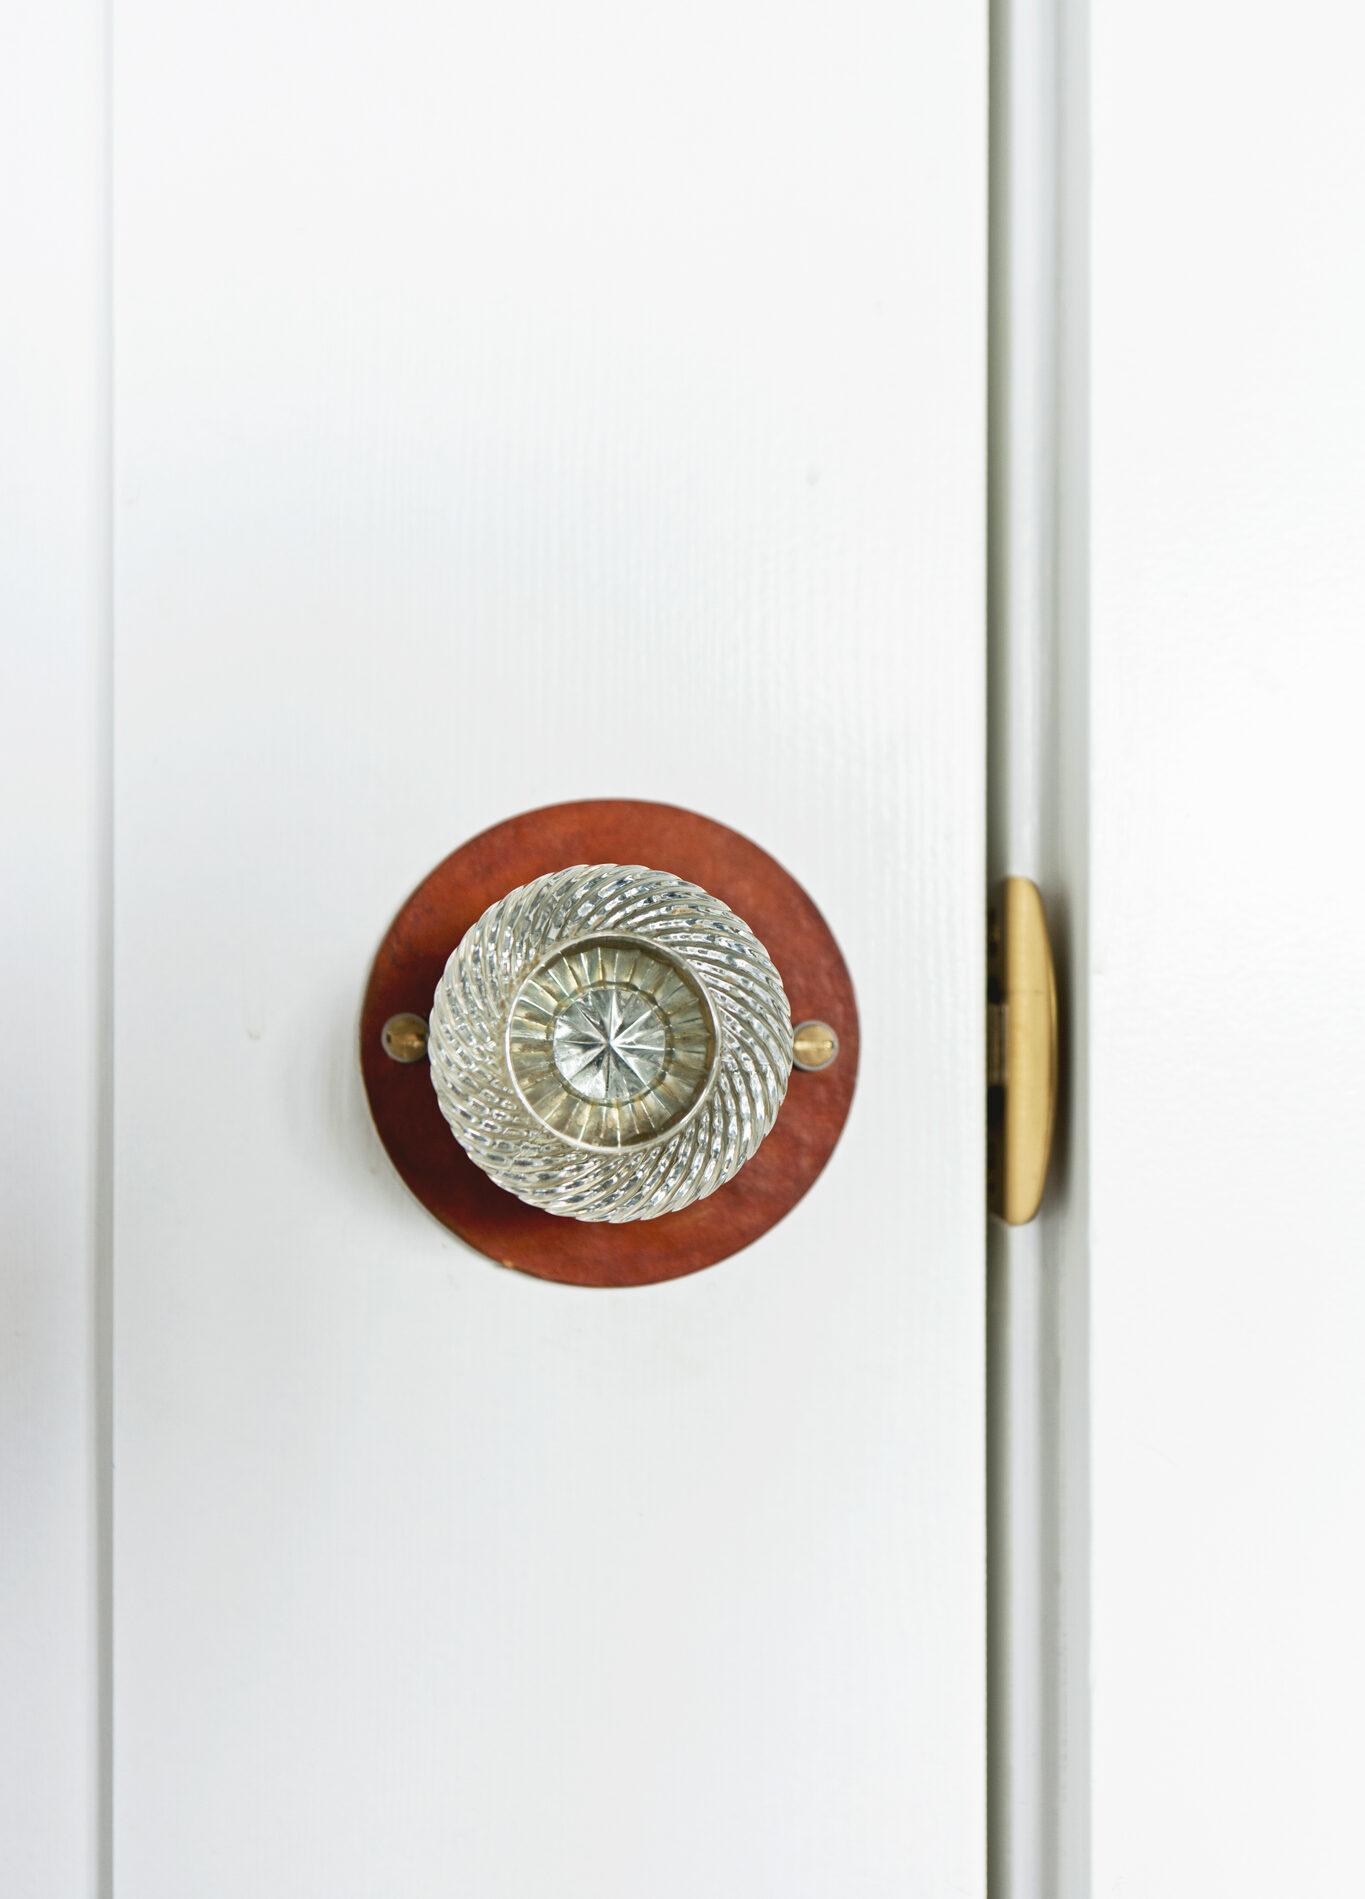 Closeup of decorative glass doorknob (salvaged) with leather rosette - photo